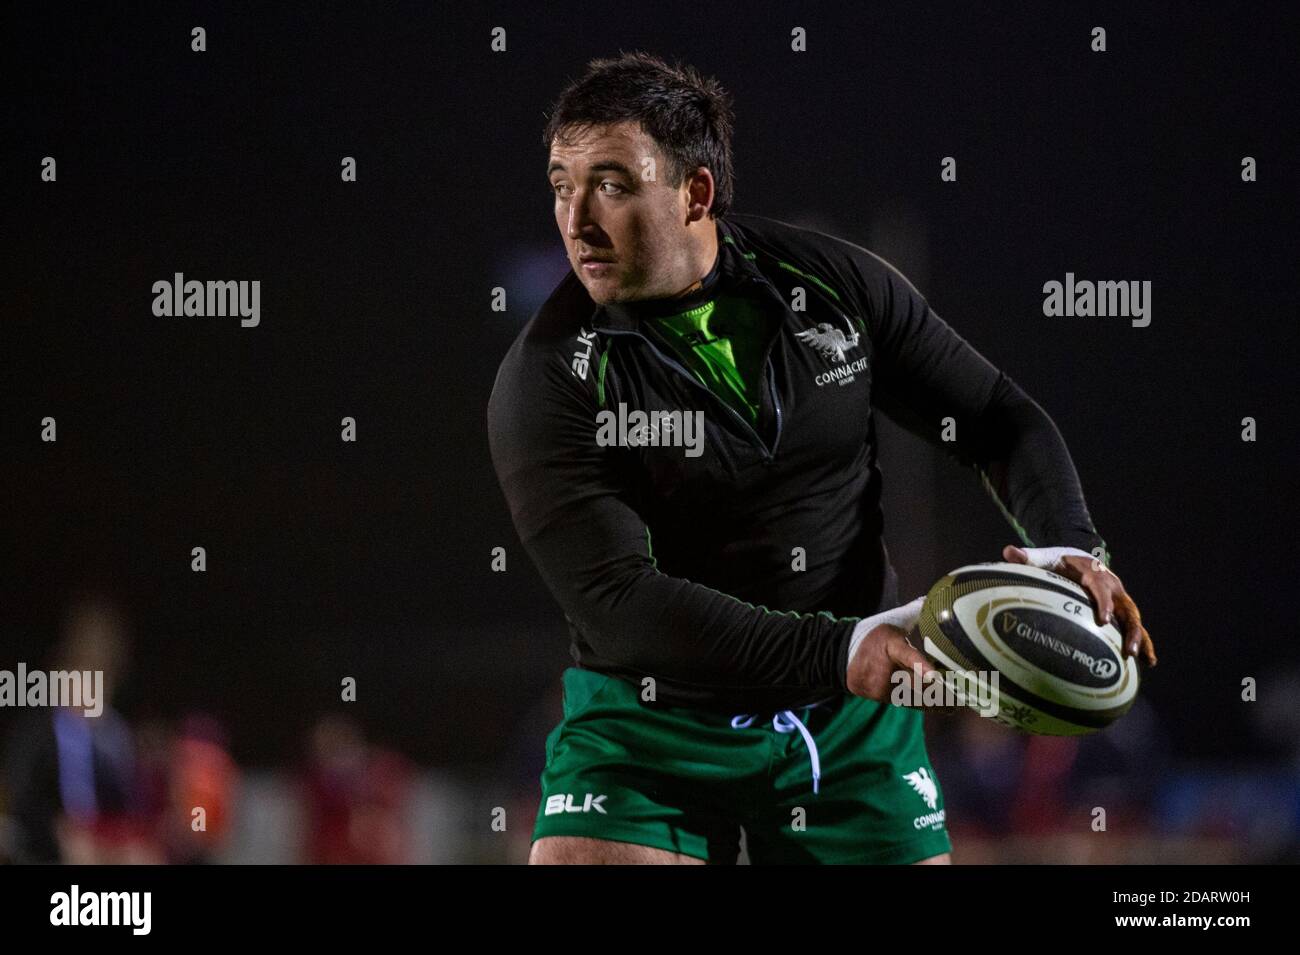 Galway, Ireland. 14th Nov, 2020. Denis Buckley of Connacht with the ball  during the Guinness PRO14 Round 6 match between Connacht Rugby and Scarlets  at the Sportsground in Galway, Ireland on November